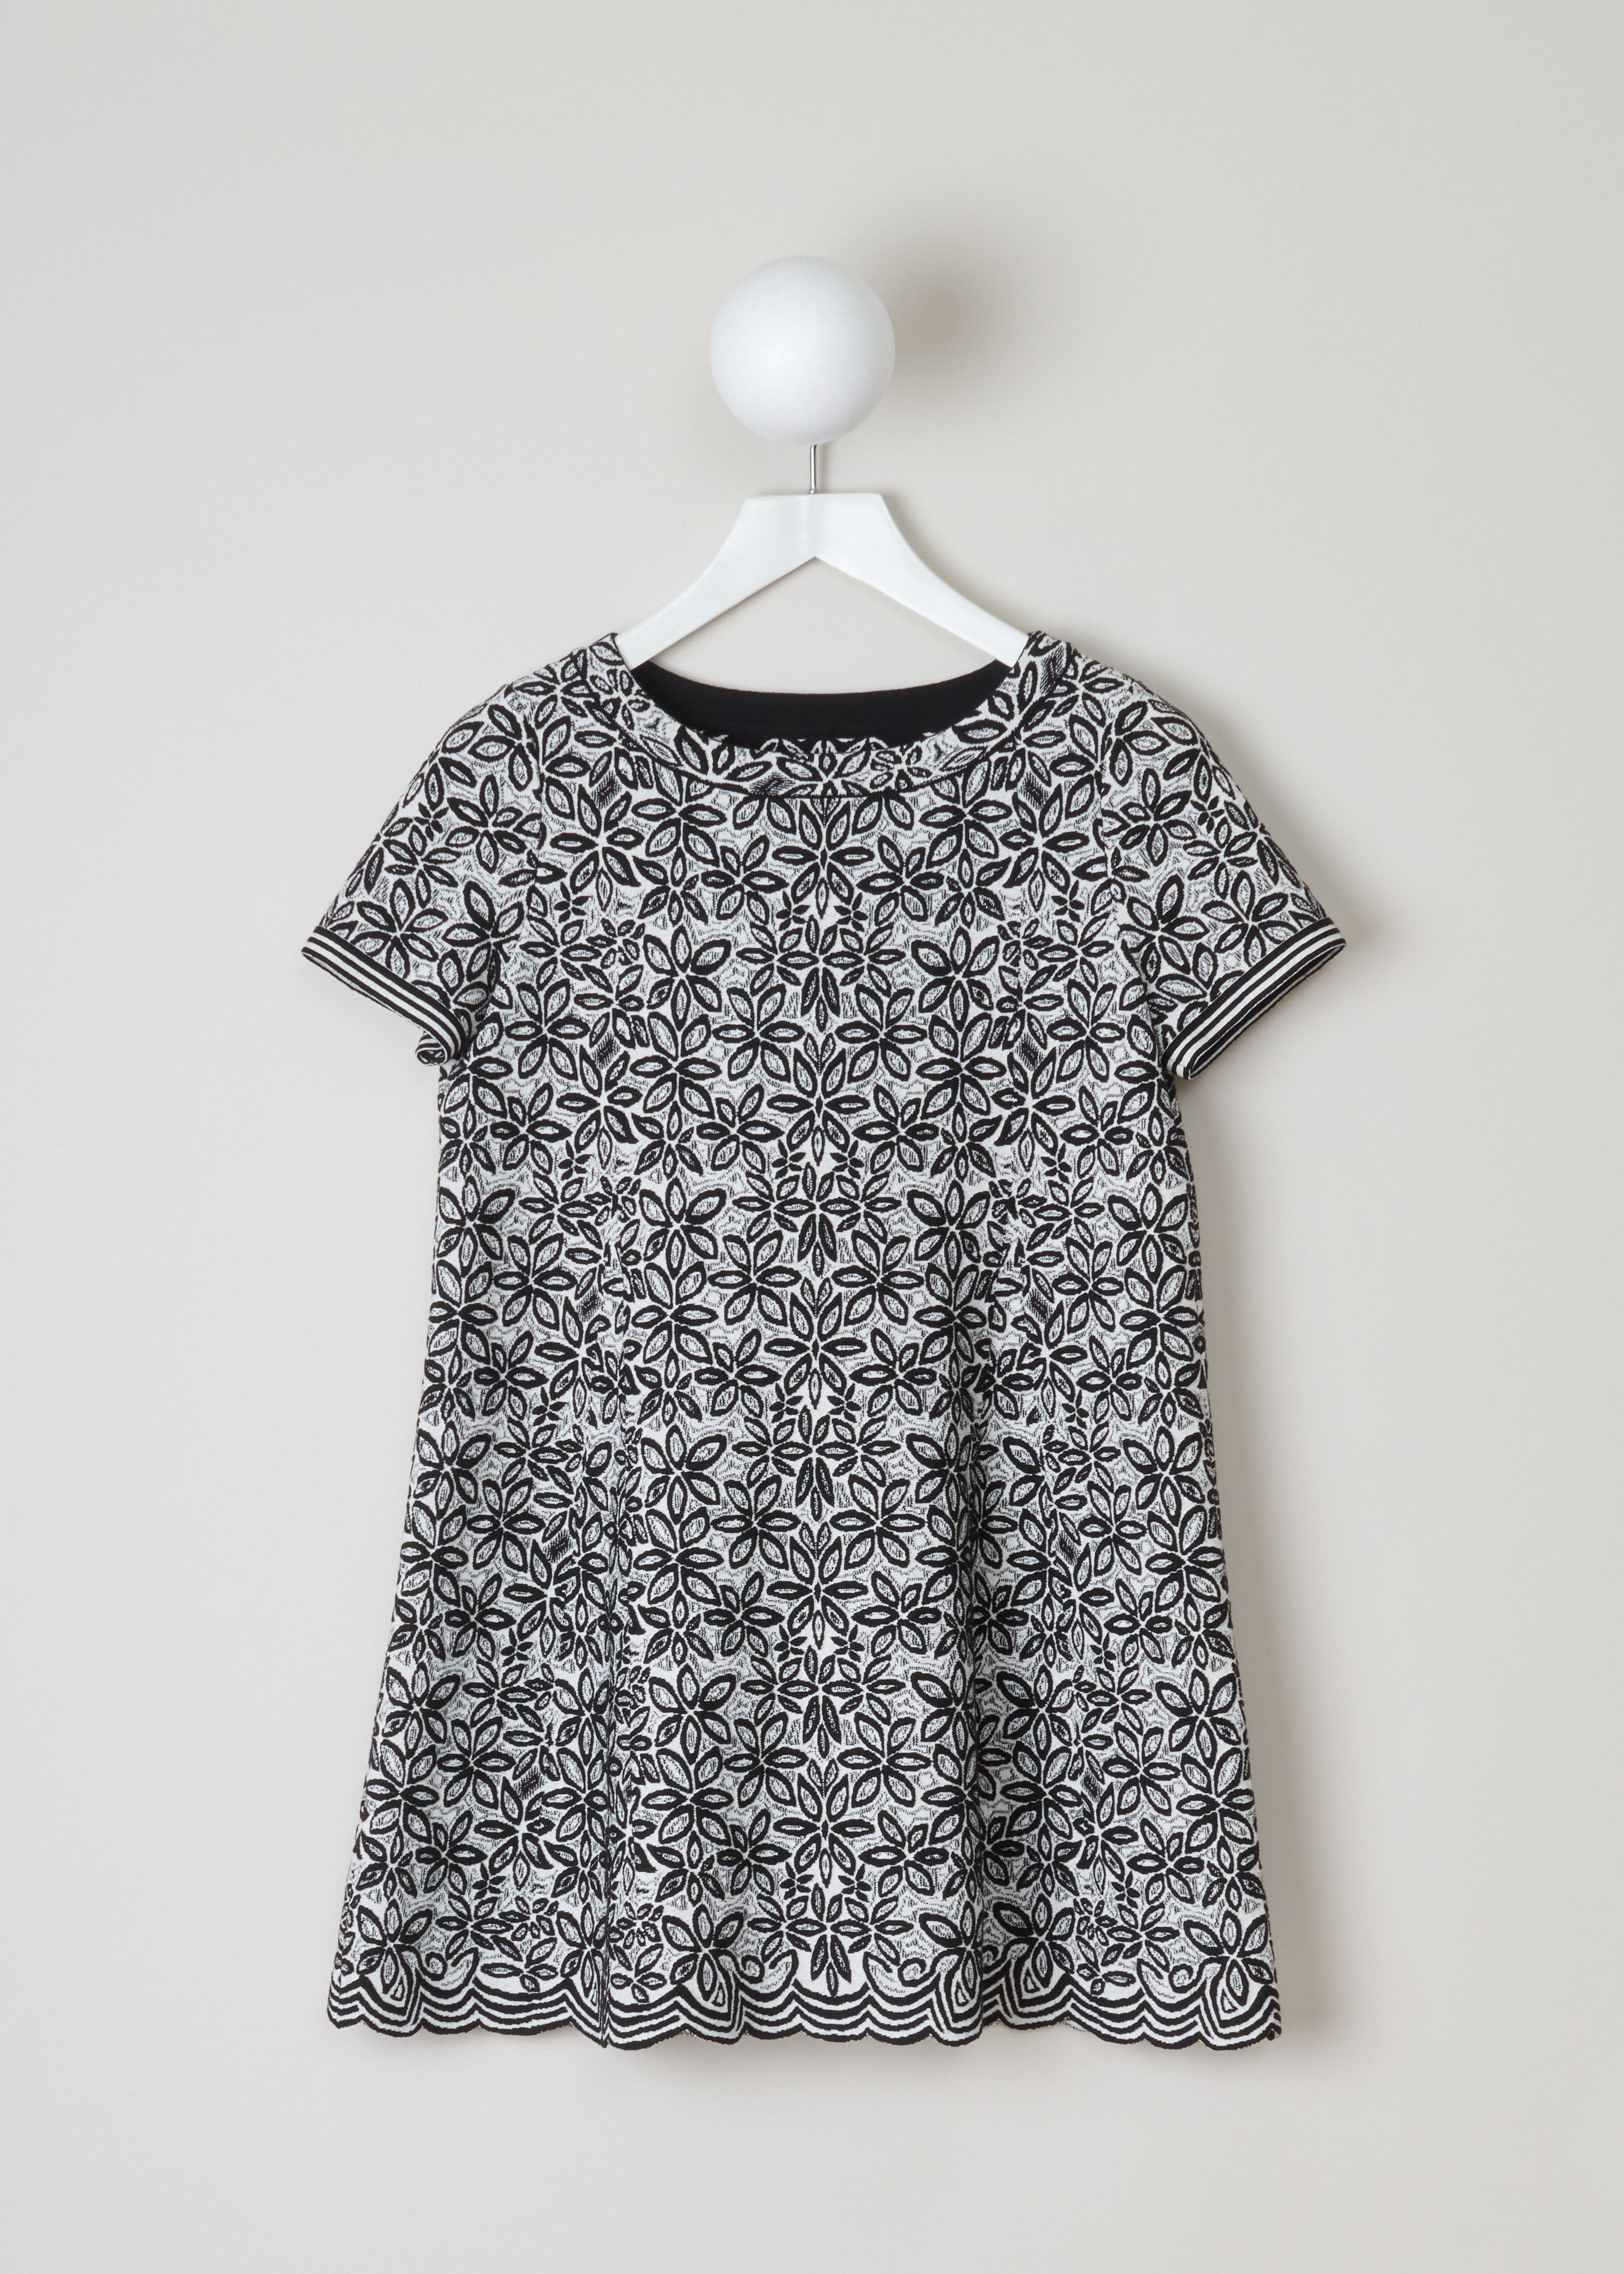 Alaïa, Wool-blend tunic with a flower pattern, 7W9UE52RM353_TUNIQUE_ADENIUM_C009_Blanc/Noir, Grey, Print, Front, Jacquard knitted tunic with a black and white flower motif. The dress has short sleeves, a wide round neckline, an A-line silhouette and scalloped hems.

